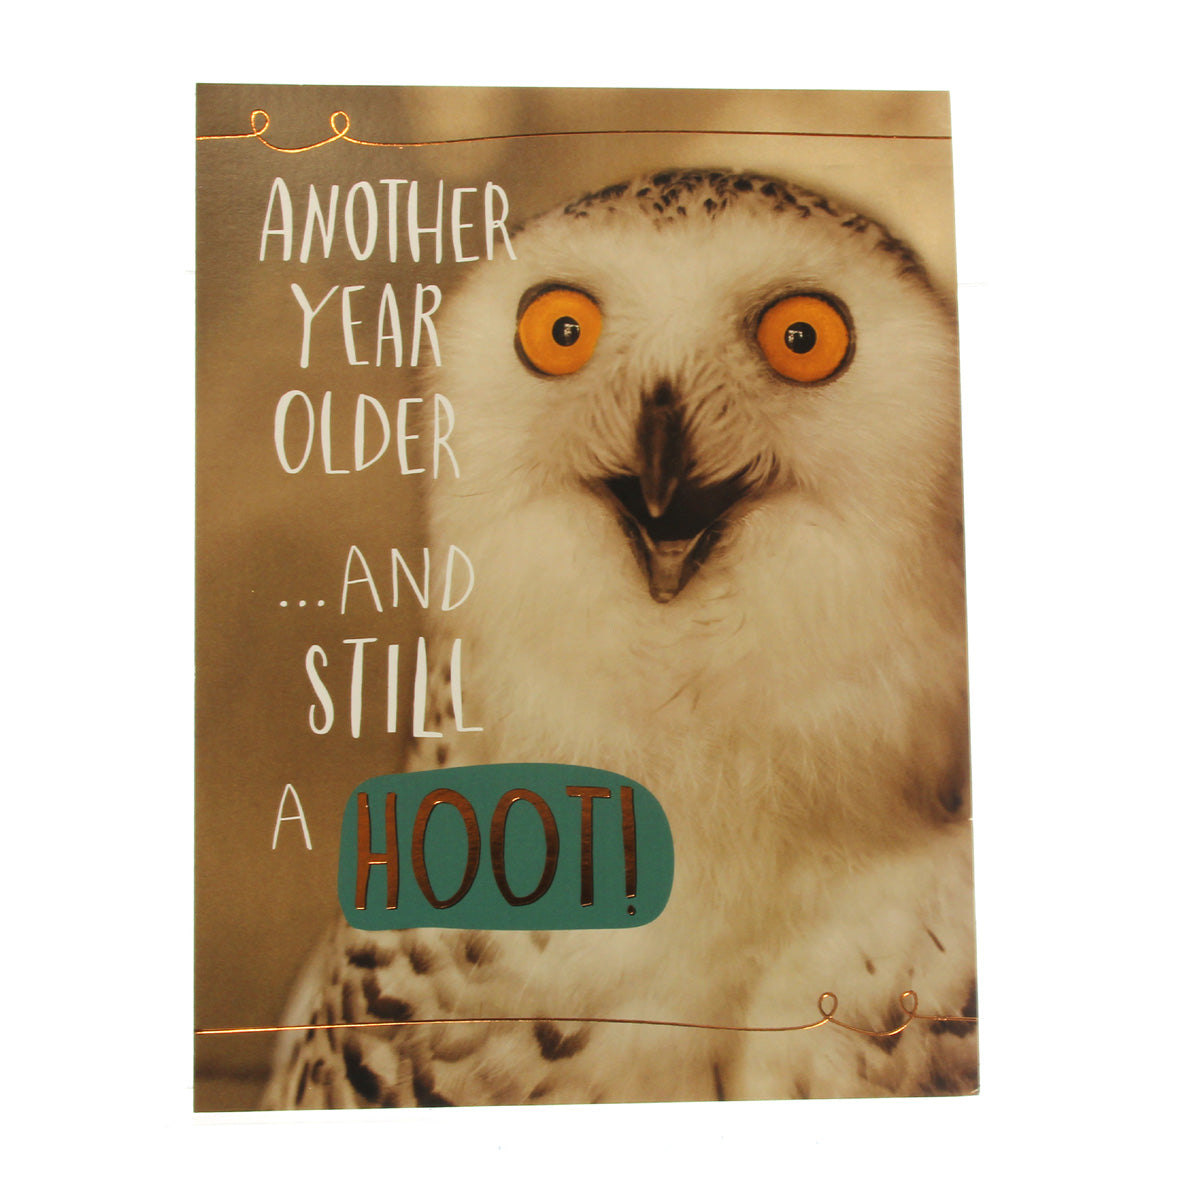 Birthday Card: Another Year Older ...and still a hoot! (w/Owl)